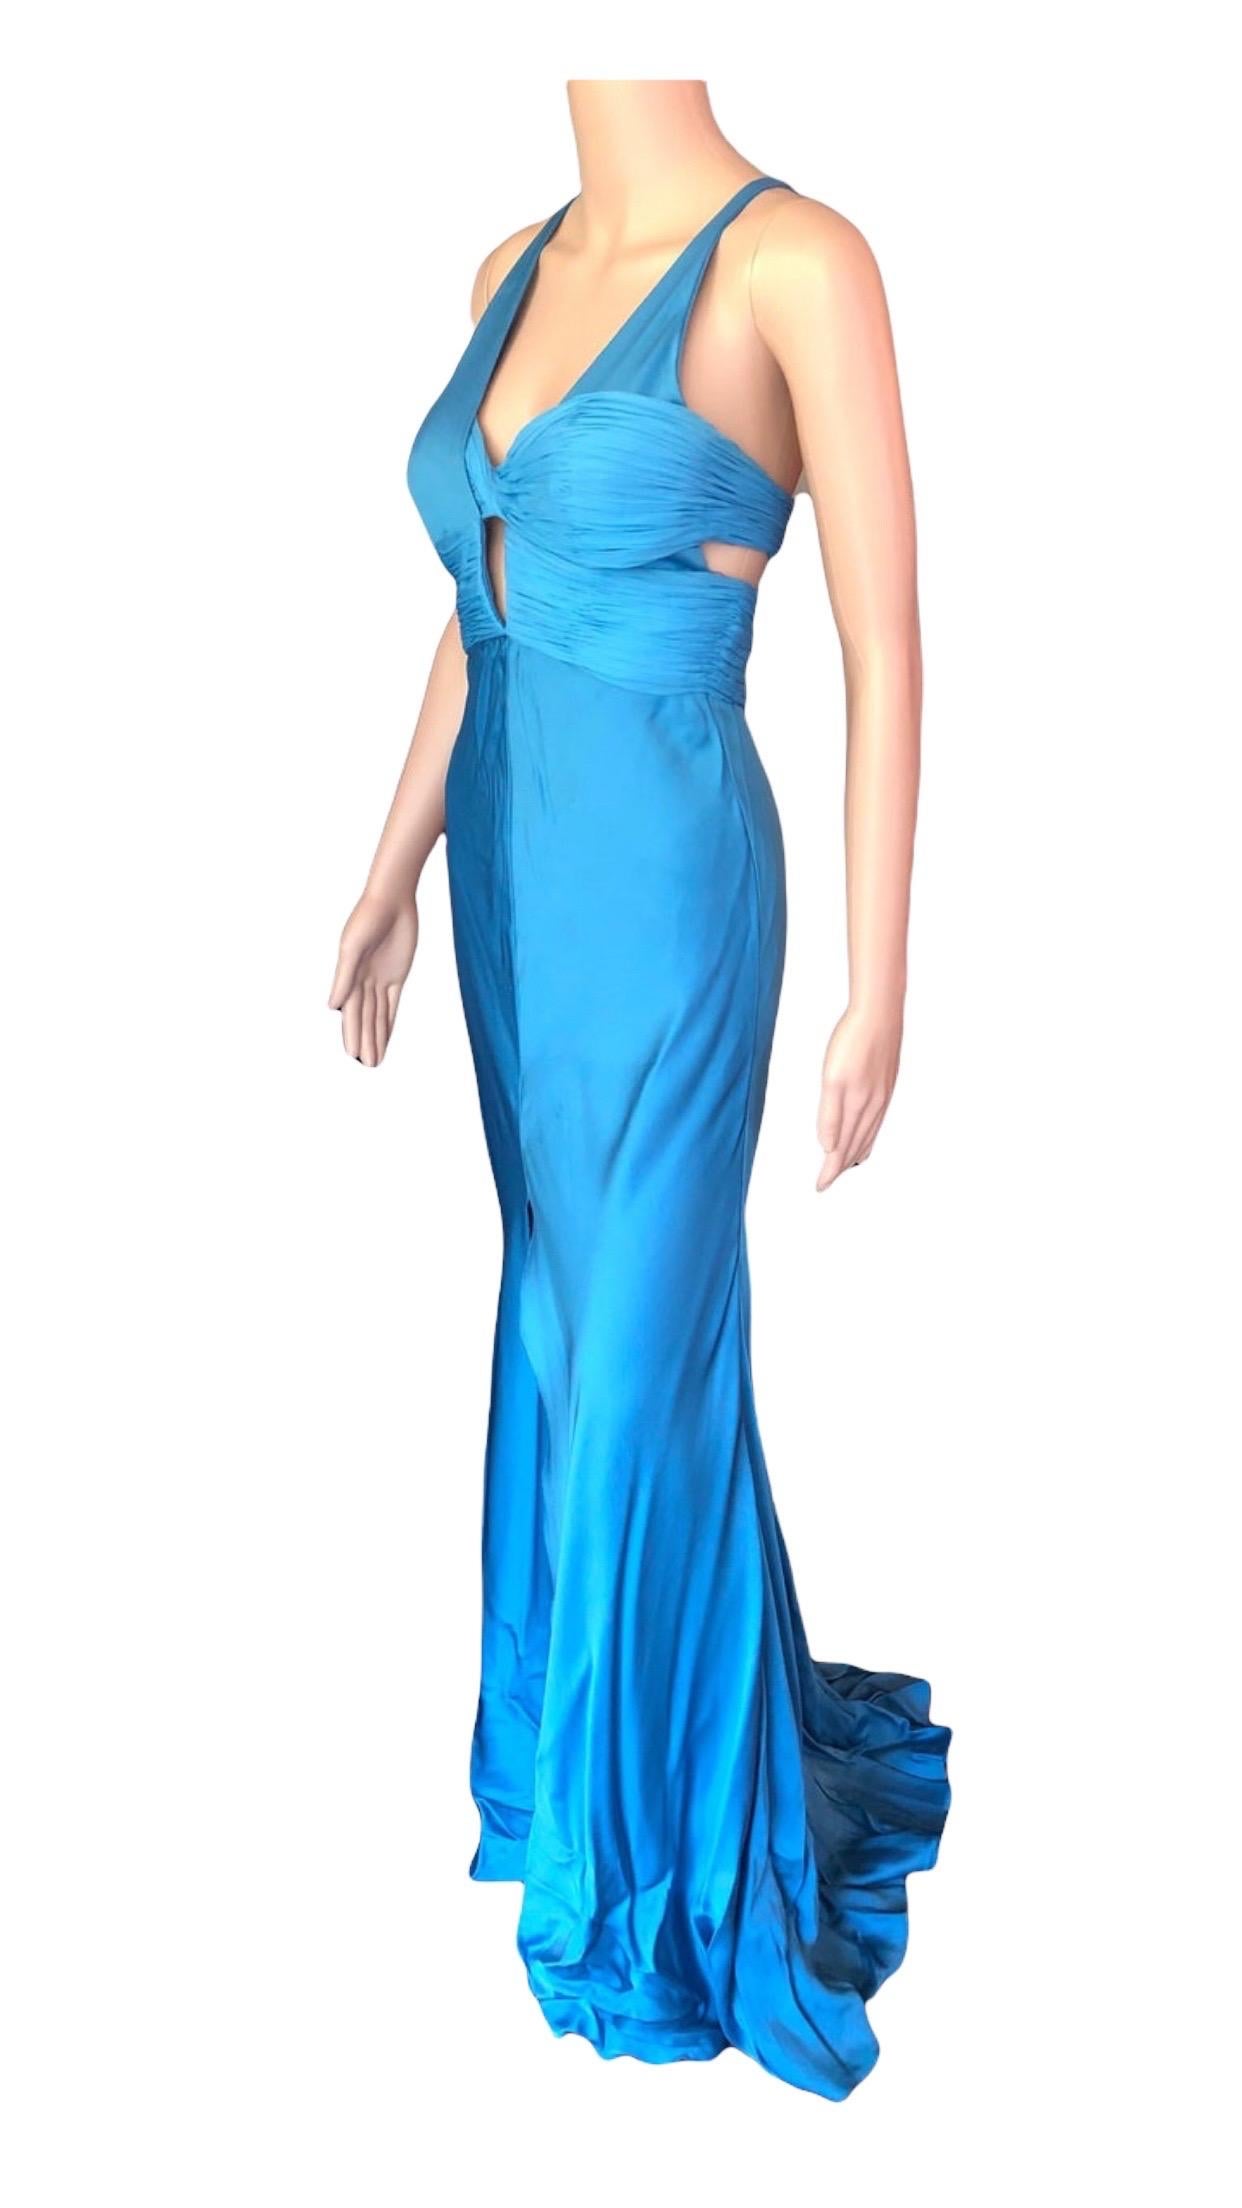 Versace S/S 2004 Bustier Open Back High Slit Blue Dress Gown For Sale 4